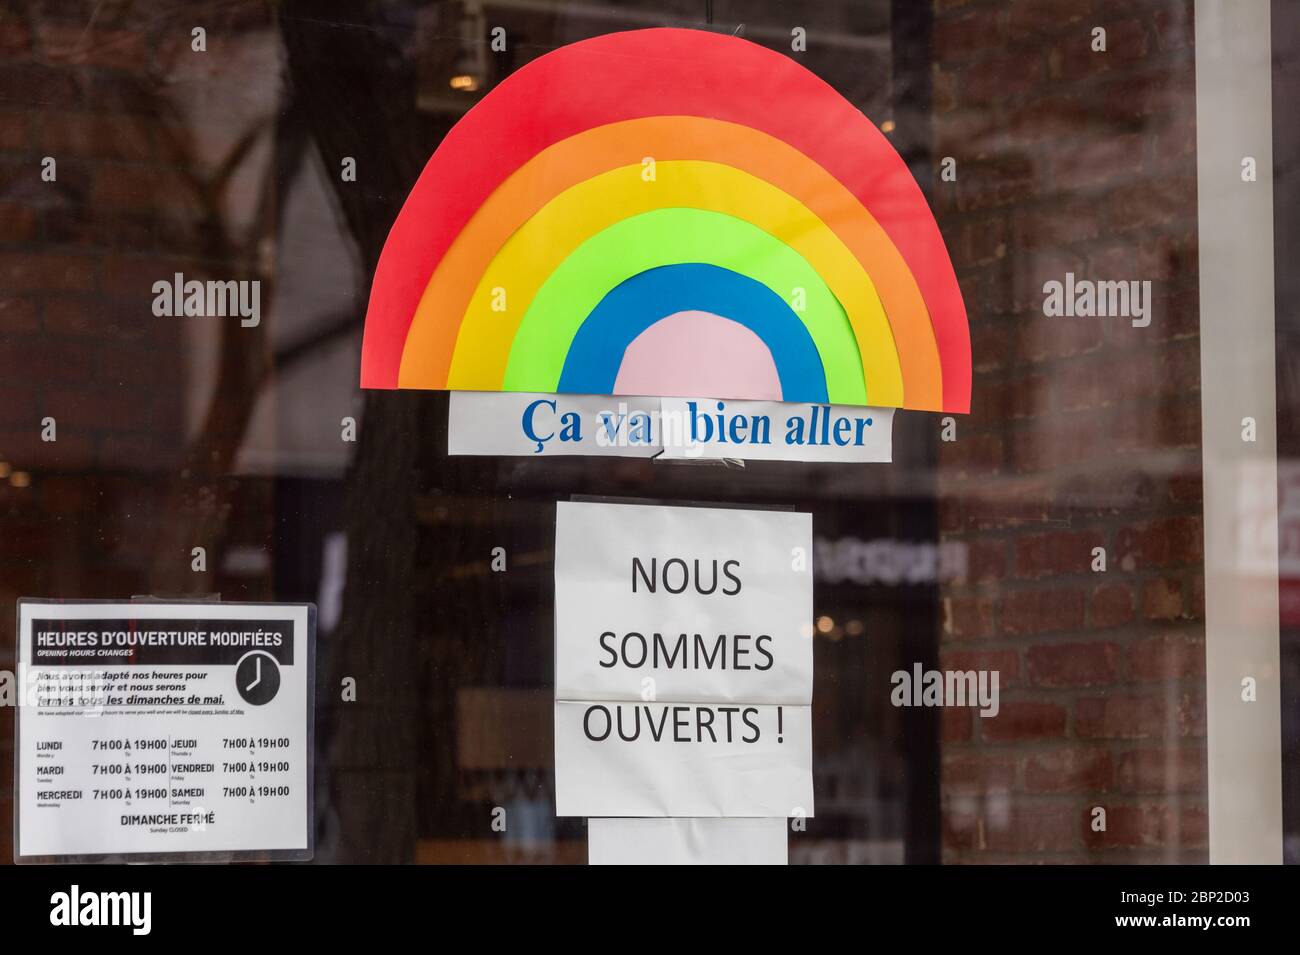 Montreal, CA - 16 May 2020: Ca va bien aller (Its going to be ok) message and Ouvert / Open sign on the door of a store during the Covid 19 pandemy Stock Photo